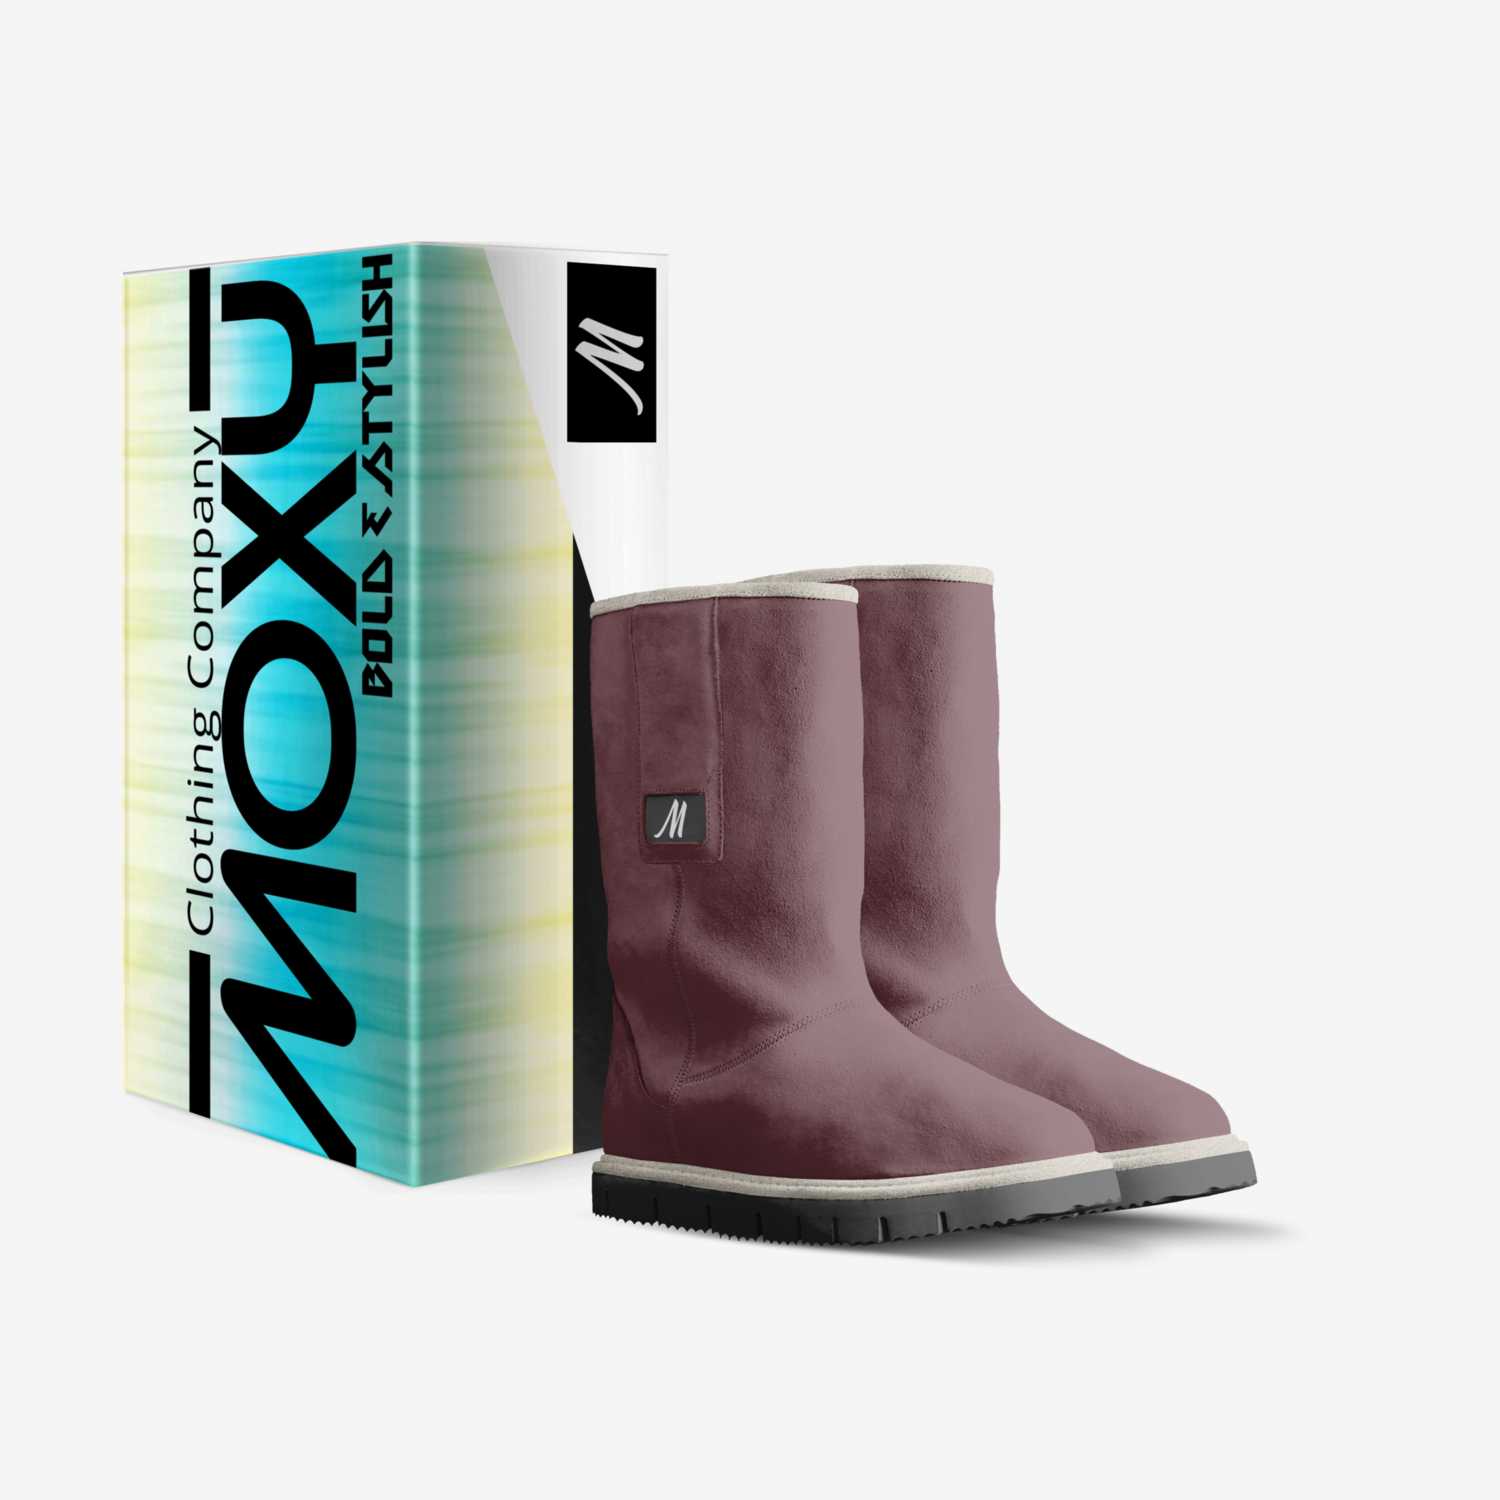 Uggz Wine custom made in Italy shoes by Moxy Clothing Co. | Box view